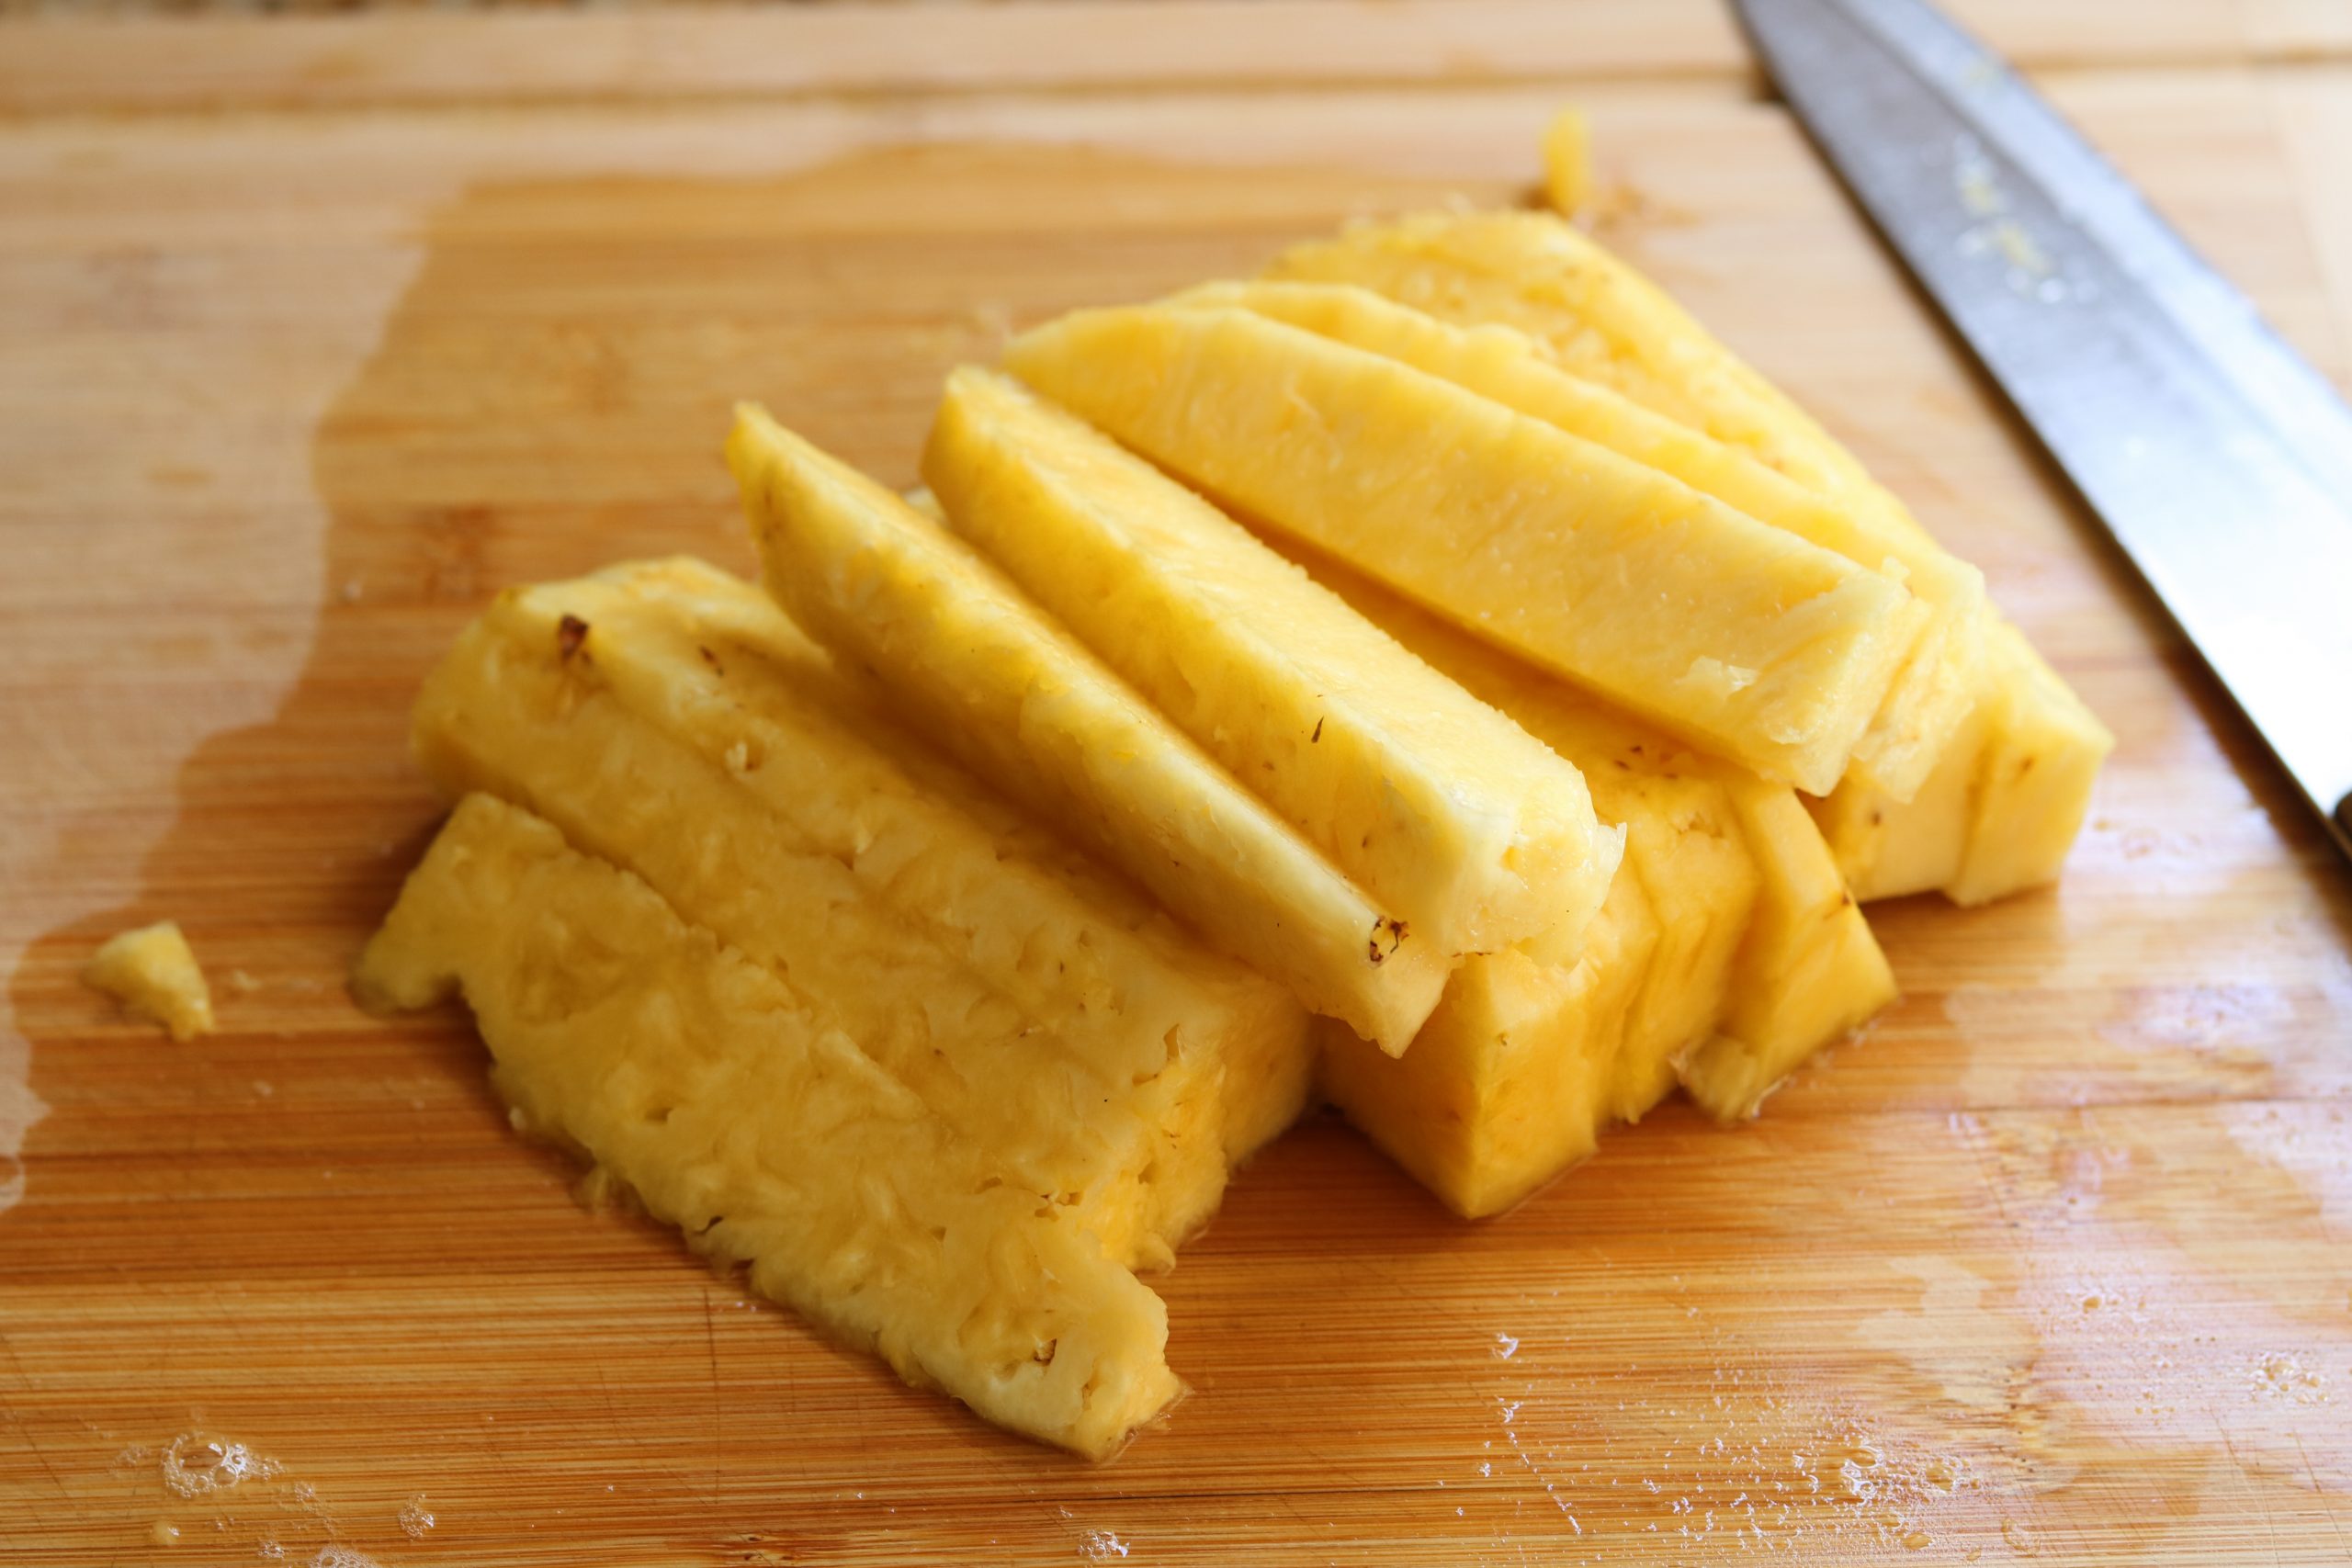 pineapple sliced into wedges